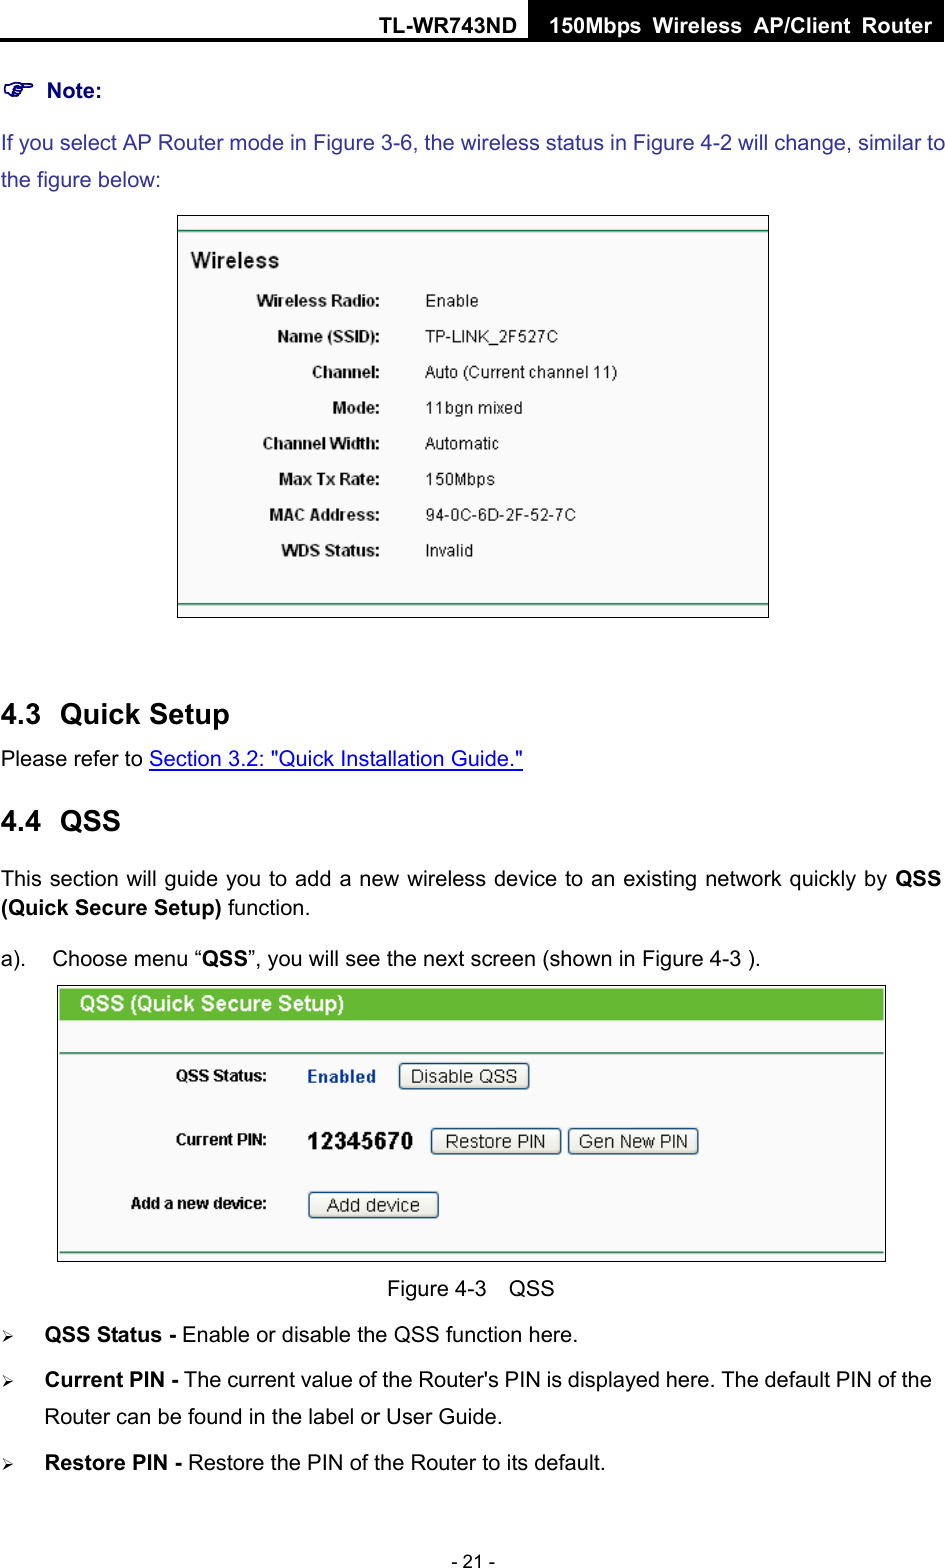 TL-WR743ND 150Mbps Wireless AP/Client Router - 21 - ) Note: If you select AP Router mode in Figure 3-6, the wireless status in Figure 4-2 will change, similar to the figure below:   4.3  Quick Setup Please refer to Section 3.2: &quot;Quick Installation Guide.&quot; 4.4  QSS This section will guide you to add a new wireless device to an existing network quickly by QSS (Quick Secure Setup) function.   a).  Choose menu “QSS”, you will see the next screen (shown in Figure 4-3 ).    Figure 4-3  QSS ¾ QSS Status - Enable or disable the QSS function here.   ¾ Current PIN - The current value of the Router&apos;s PIN is displayed here. The default PIN of the Router can be found in the label or User Guide.   ¾ Restore PIN - Restore the PIN of the Router to its default.   